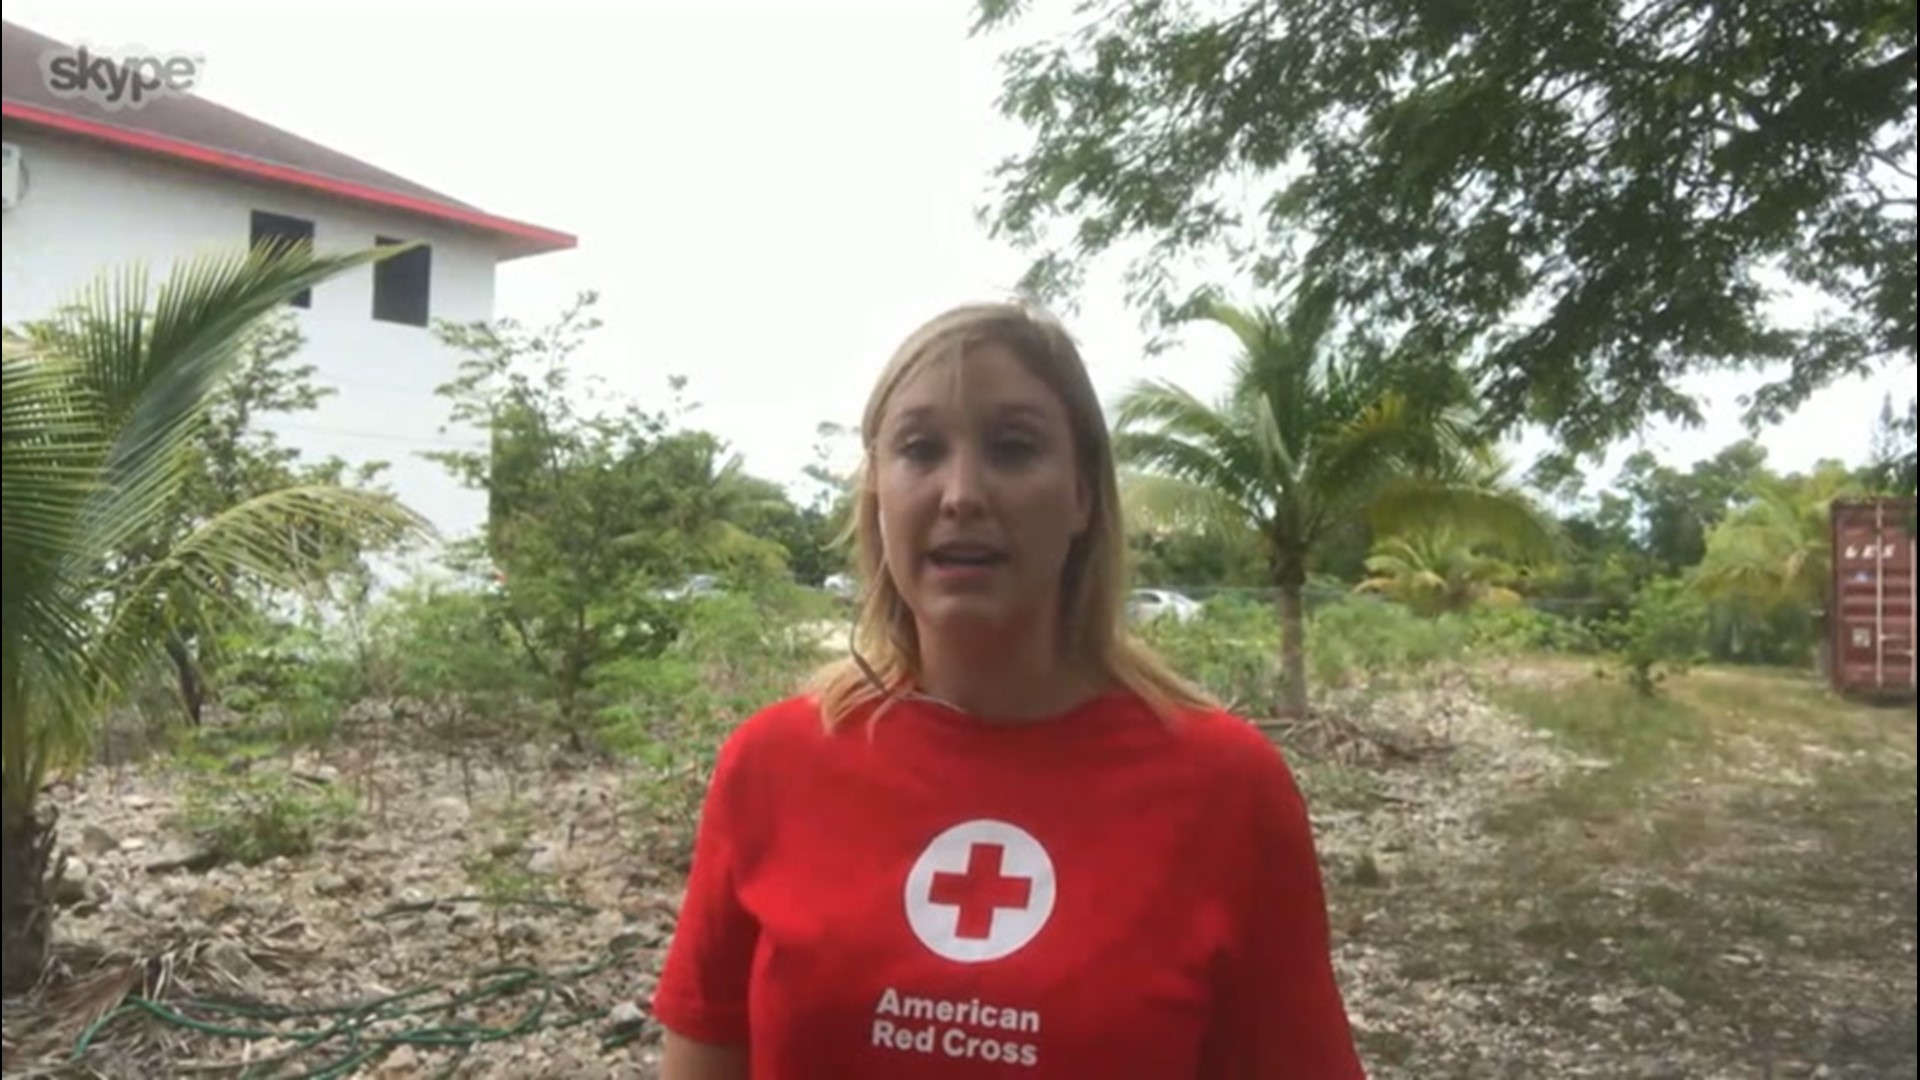 AccuWeather's Bernie Rayno spoke with American Red Cross Spokesperson Holly Baker about how to prepare for Cristobal and why it's important.